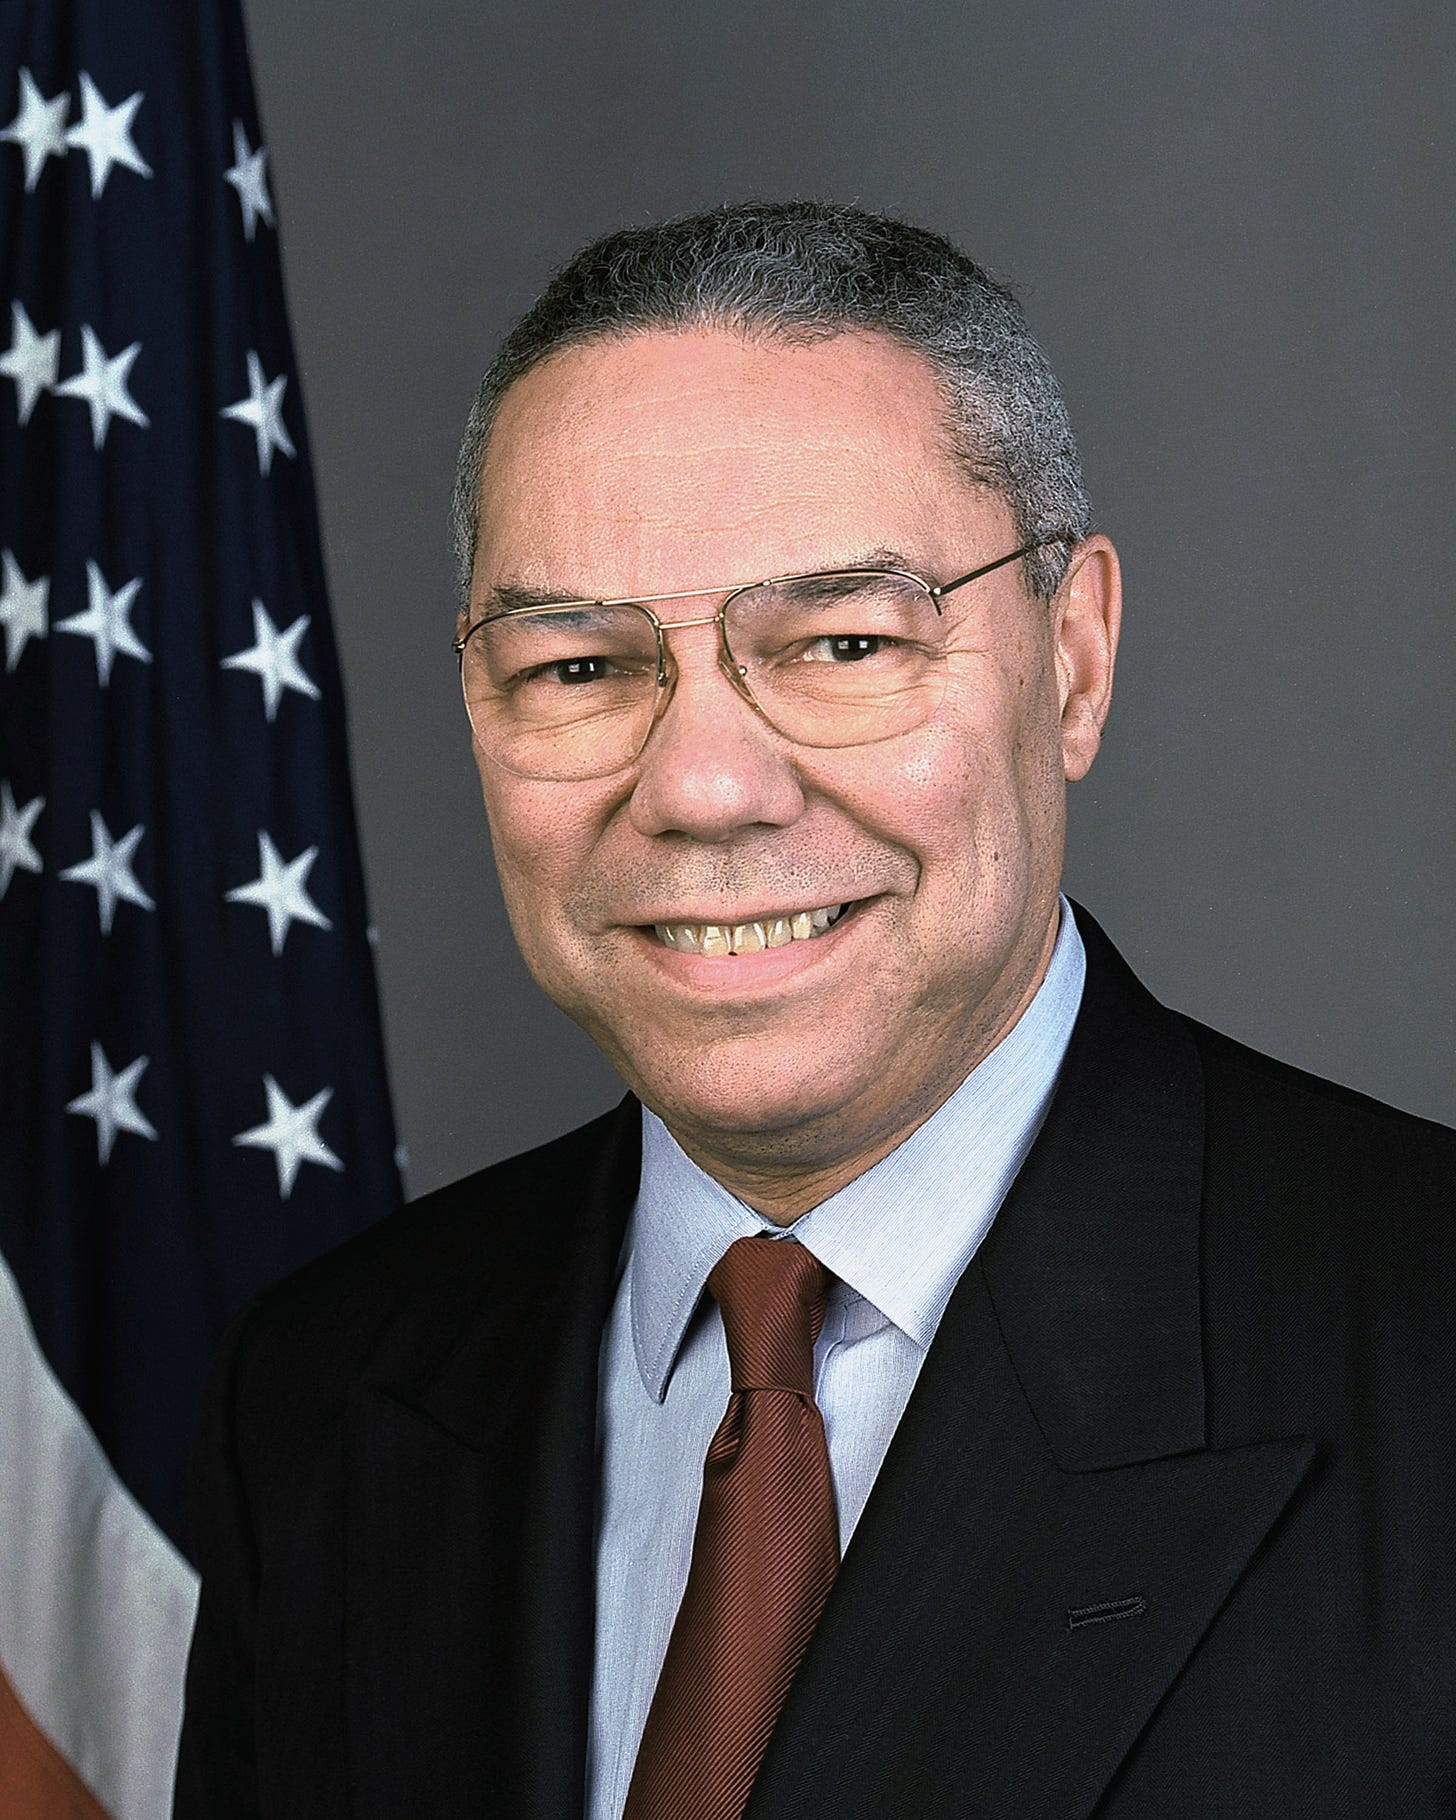 Colin_Powell_official_Secretary_of_State_photo.jpg (2400×3000)